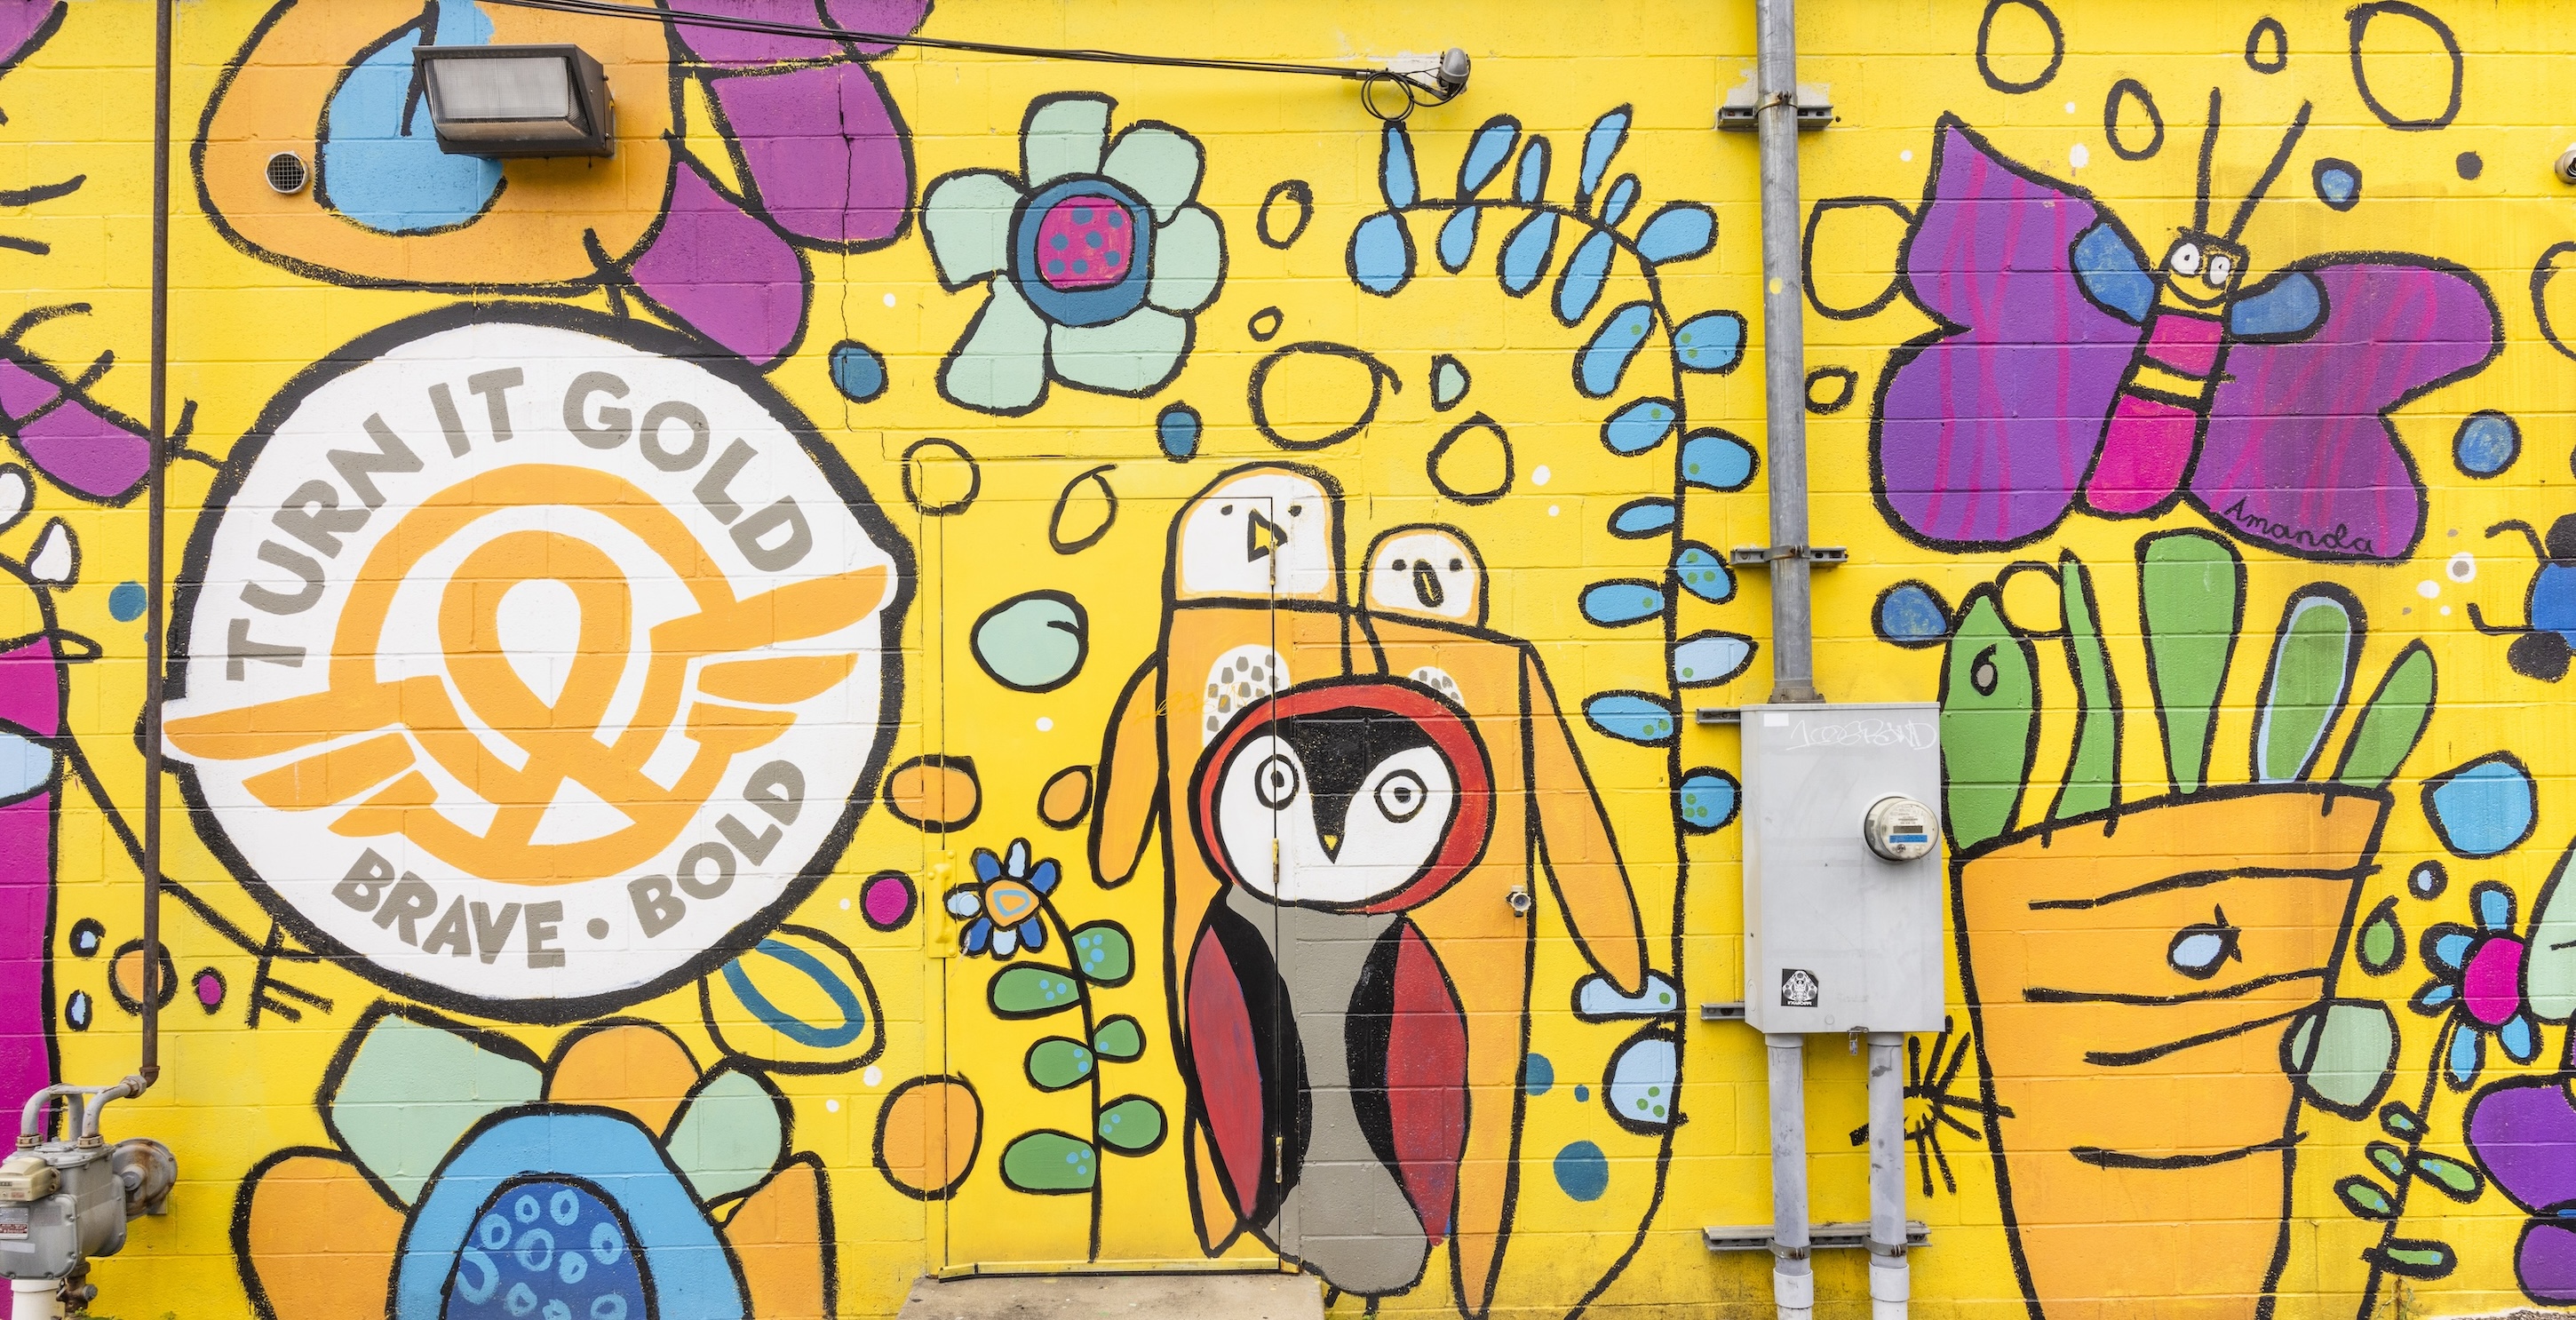 A colorful mural featuring animals and butterflies, with the words "Turn it Gold: Brave/Bold"